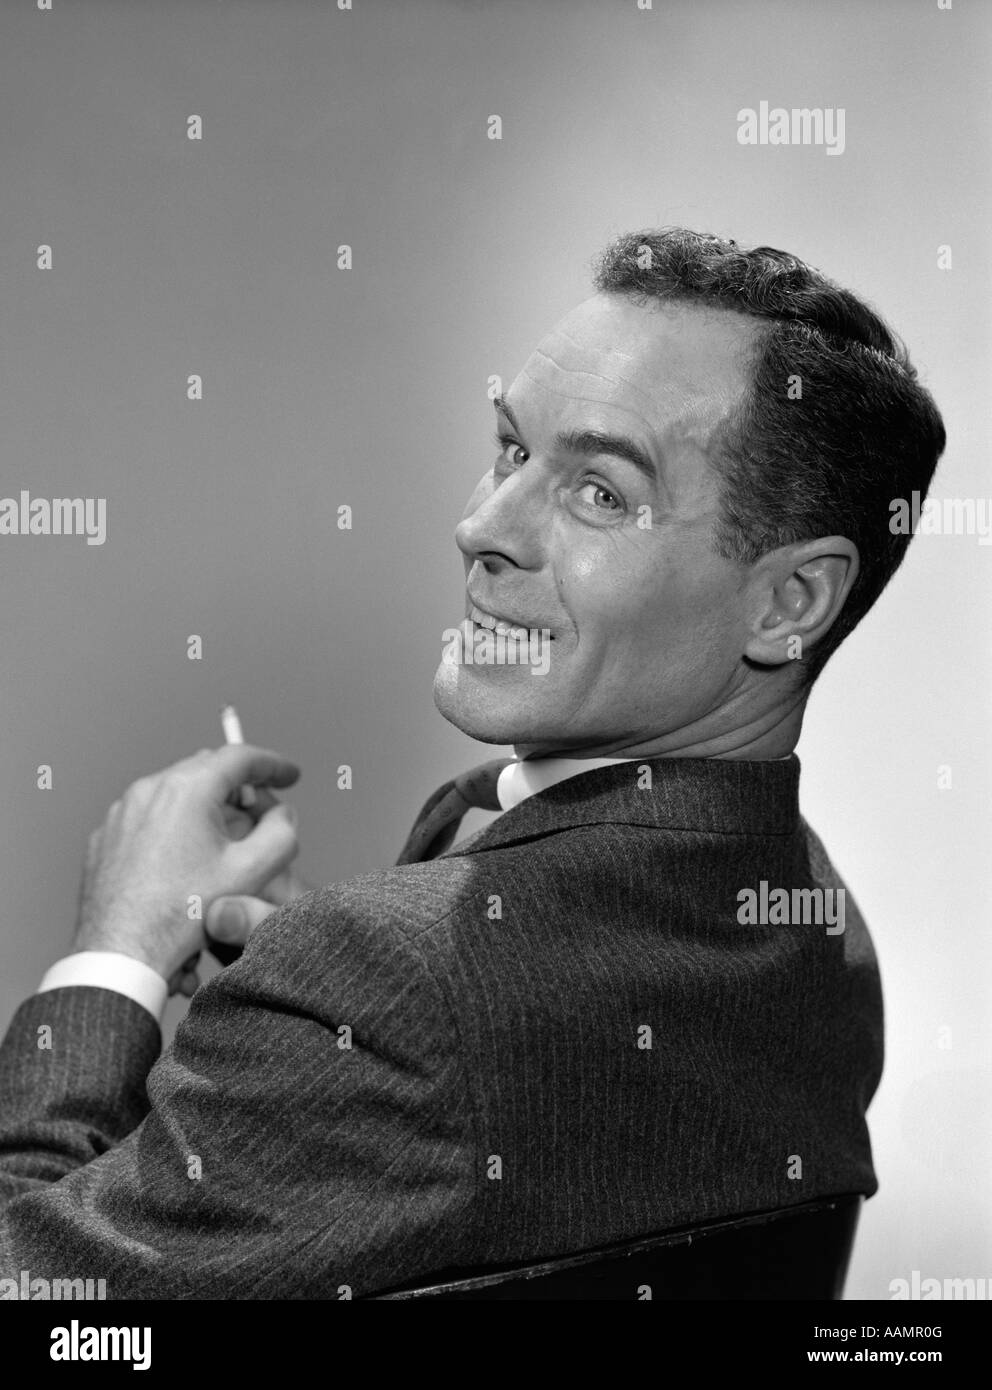 1950s 3 4 PROFILE MAN LOOKING OVER HIS SHOULDER CIGARETTE IN HAND SMILING Stock Photo